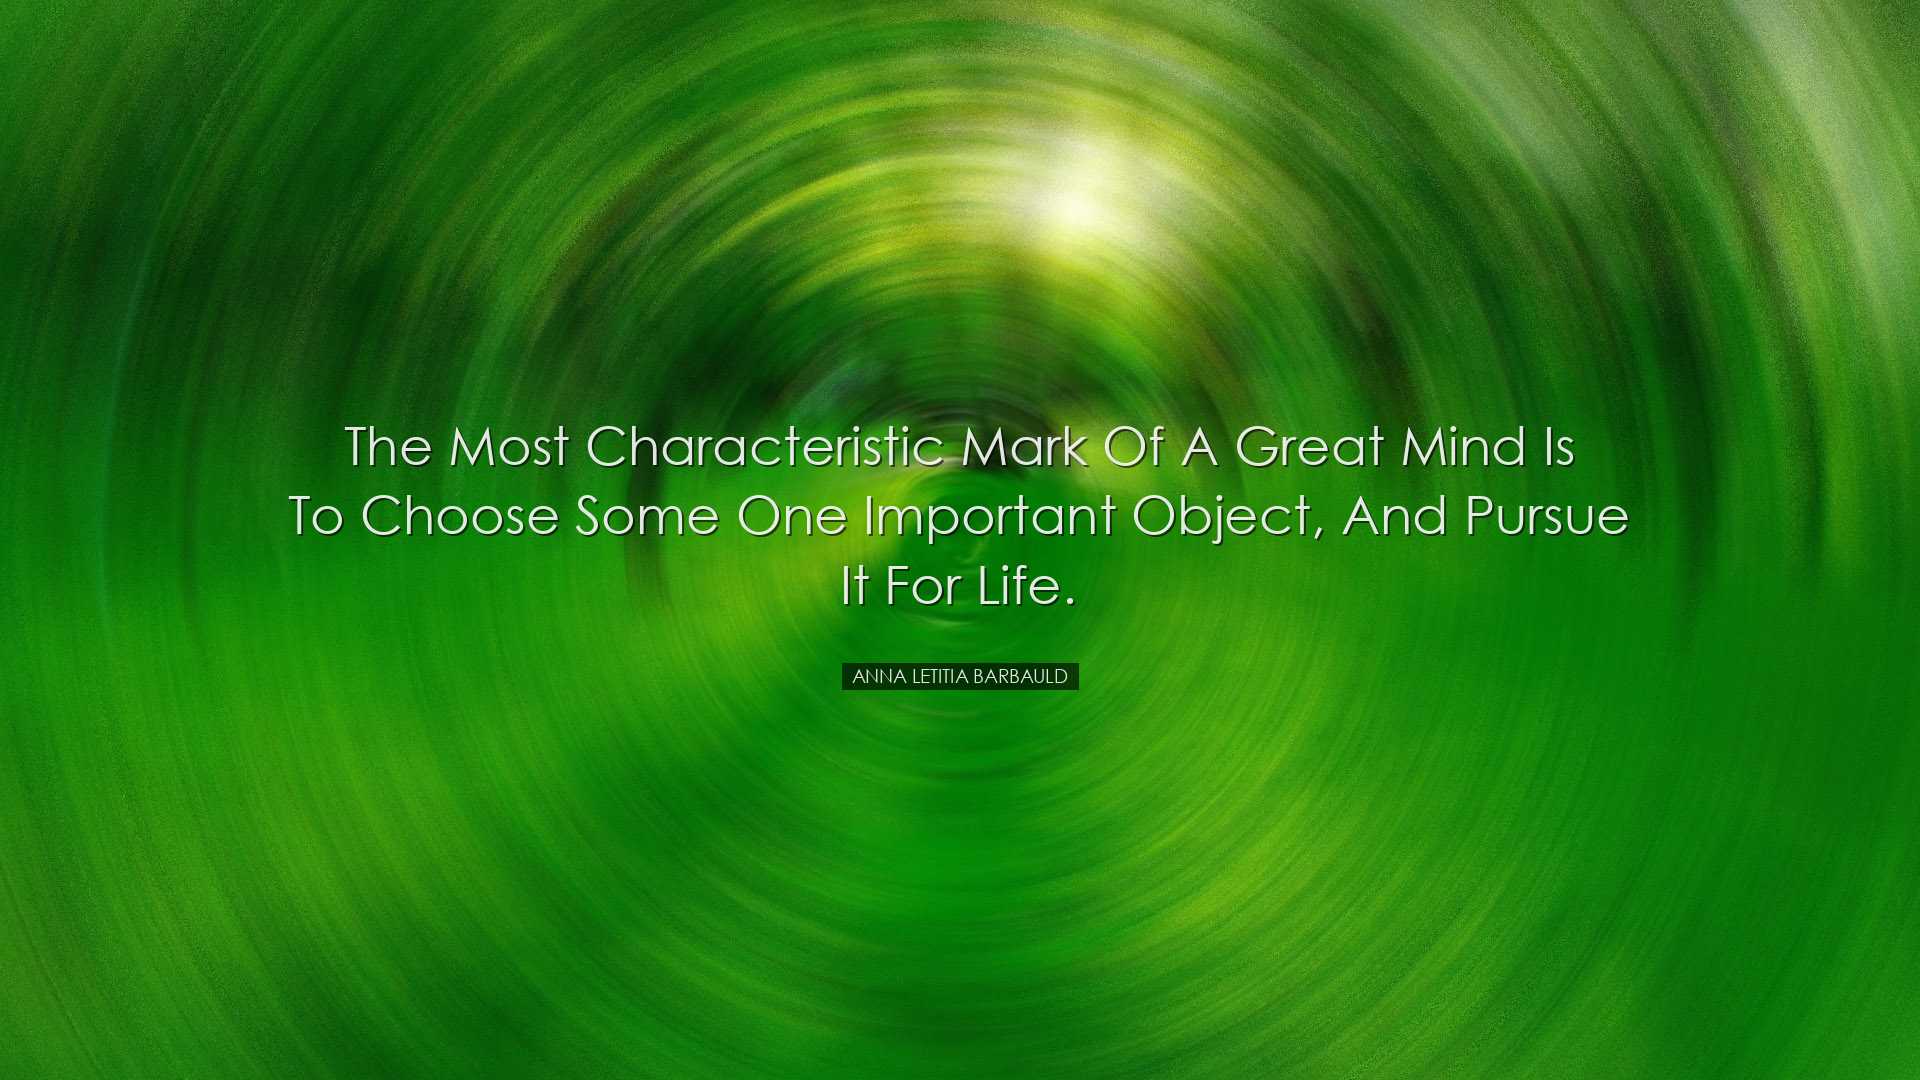 The most characteristic mark of a great mind is to choose some one